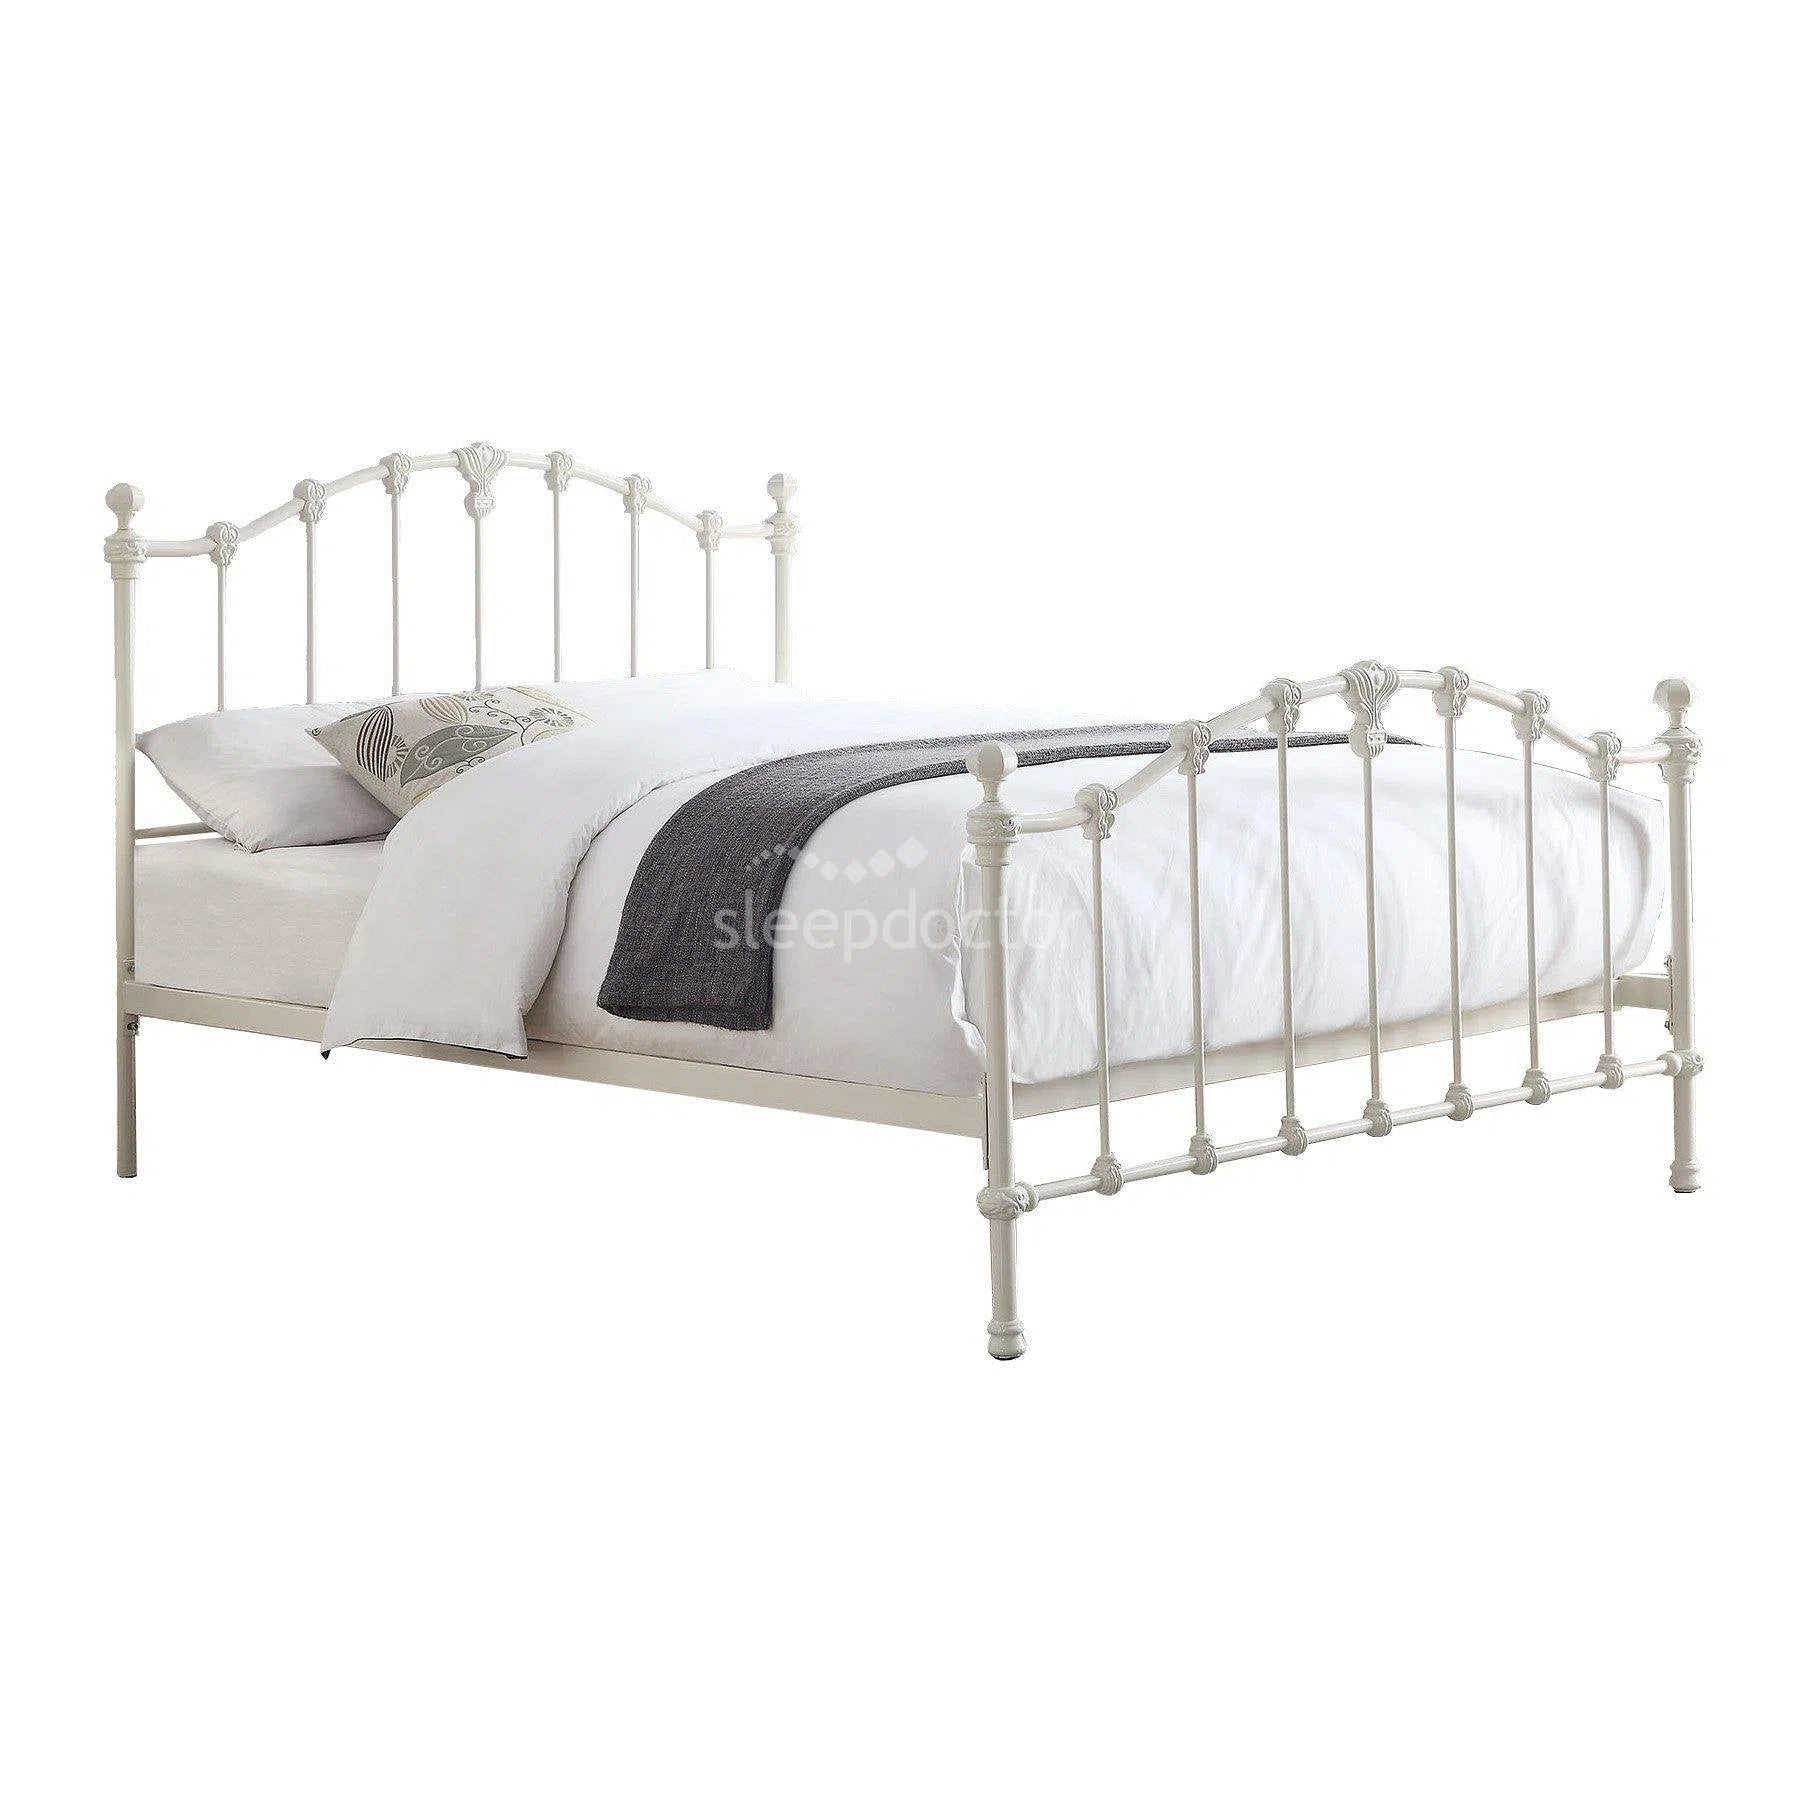 Claremont Cast Iron Bed Antique White With Slats-Sleep Doctor